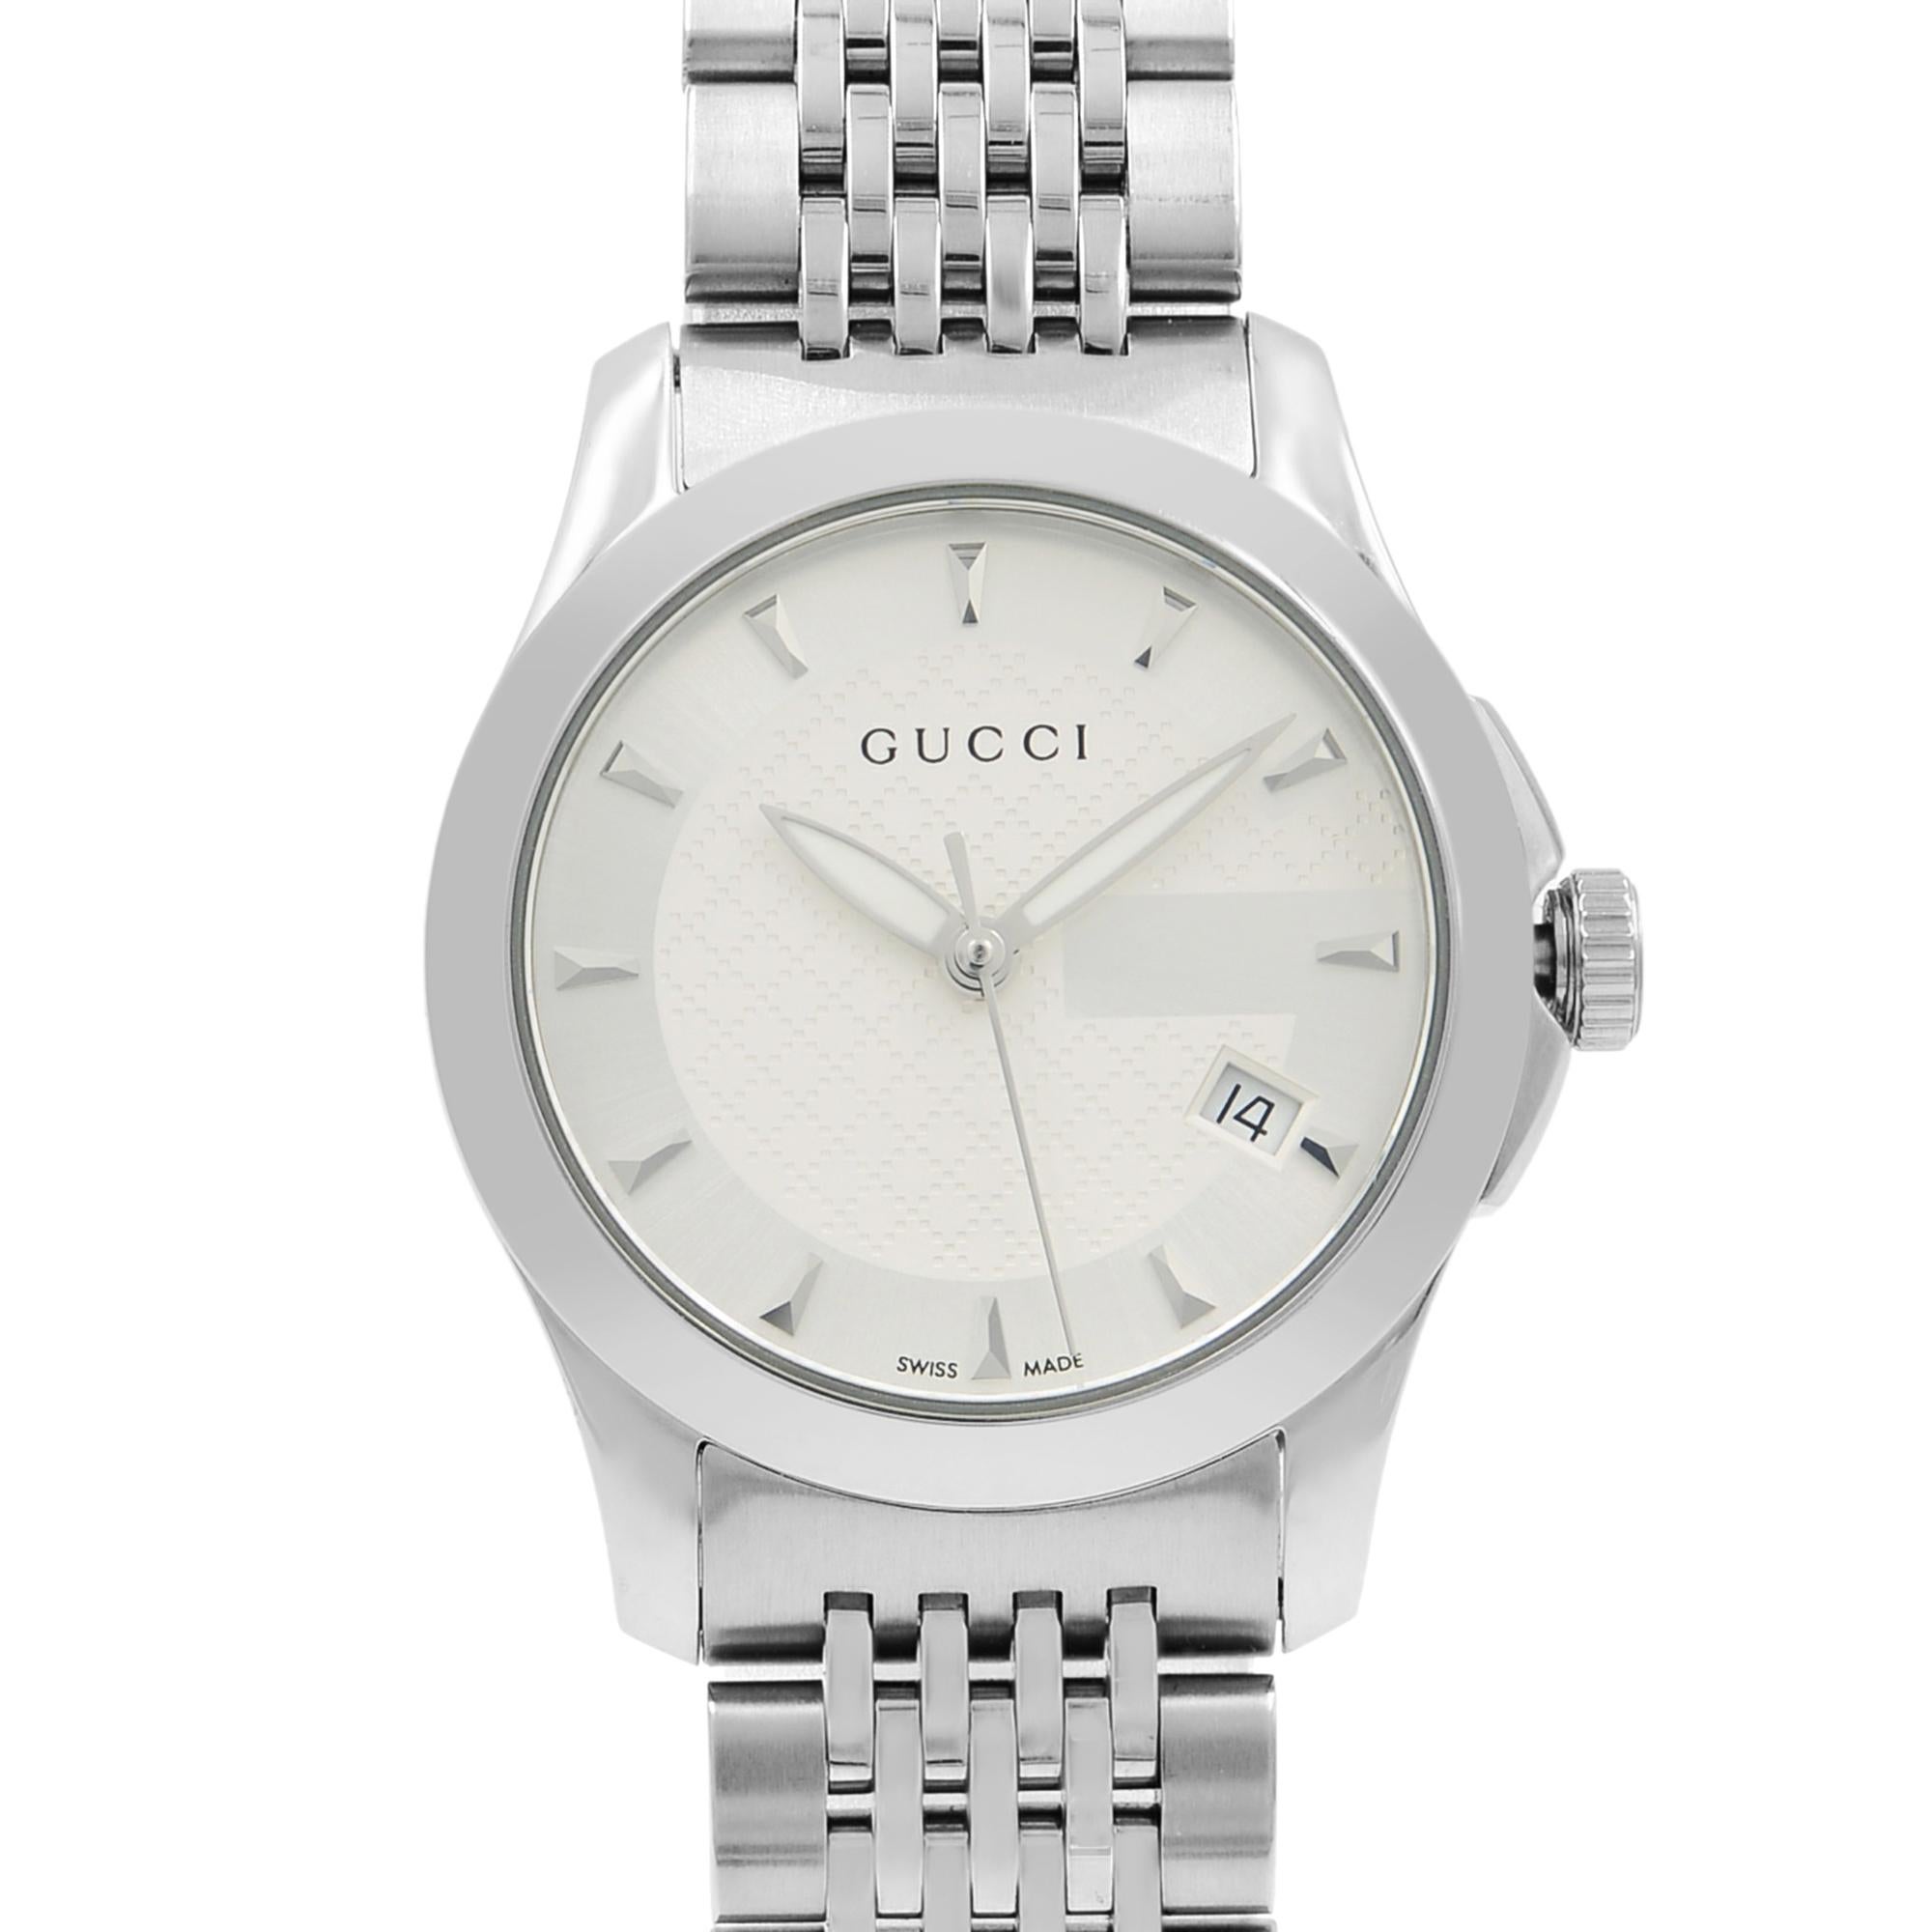 This pre-owned Gucci G-Timeless YA126501 is a beautiful Ladies timepiece that is powered by a quartz movement which is cased in a stainless steel case. It has a round shape face, date dial and has hand sticks style markers. It is completed with a